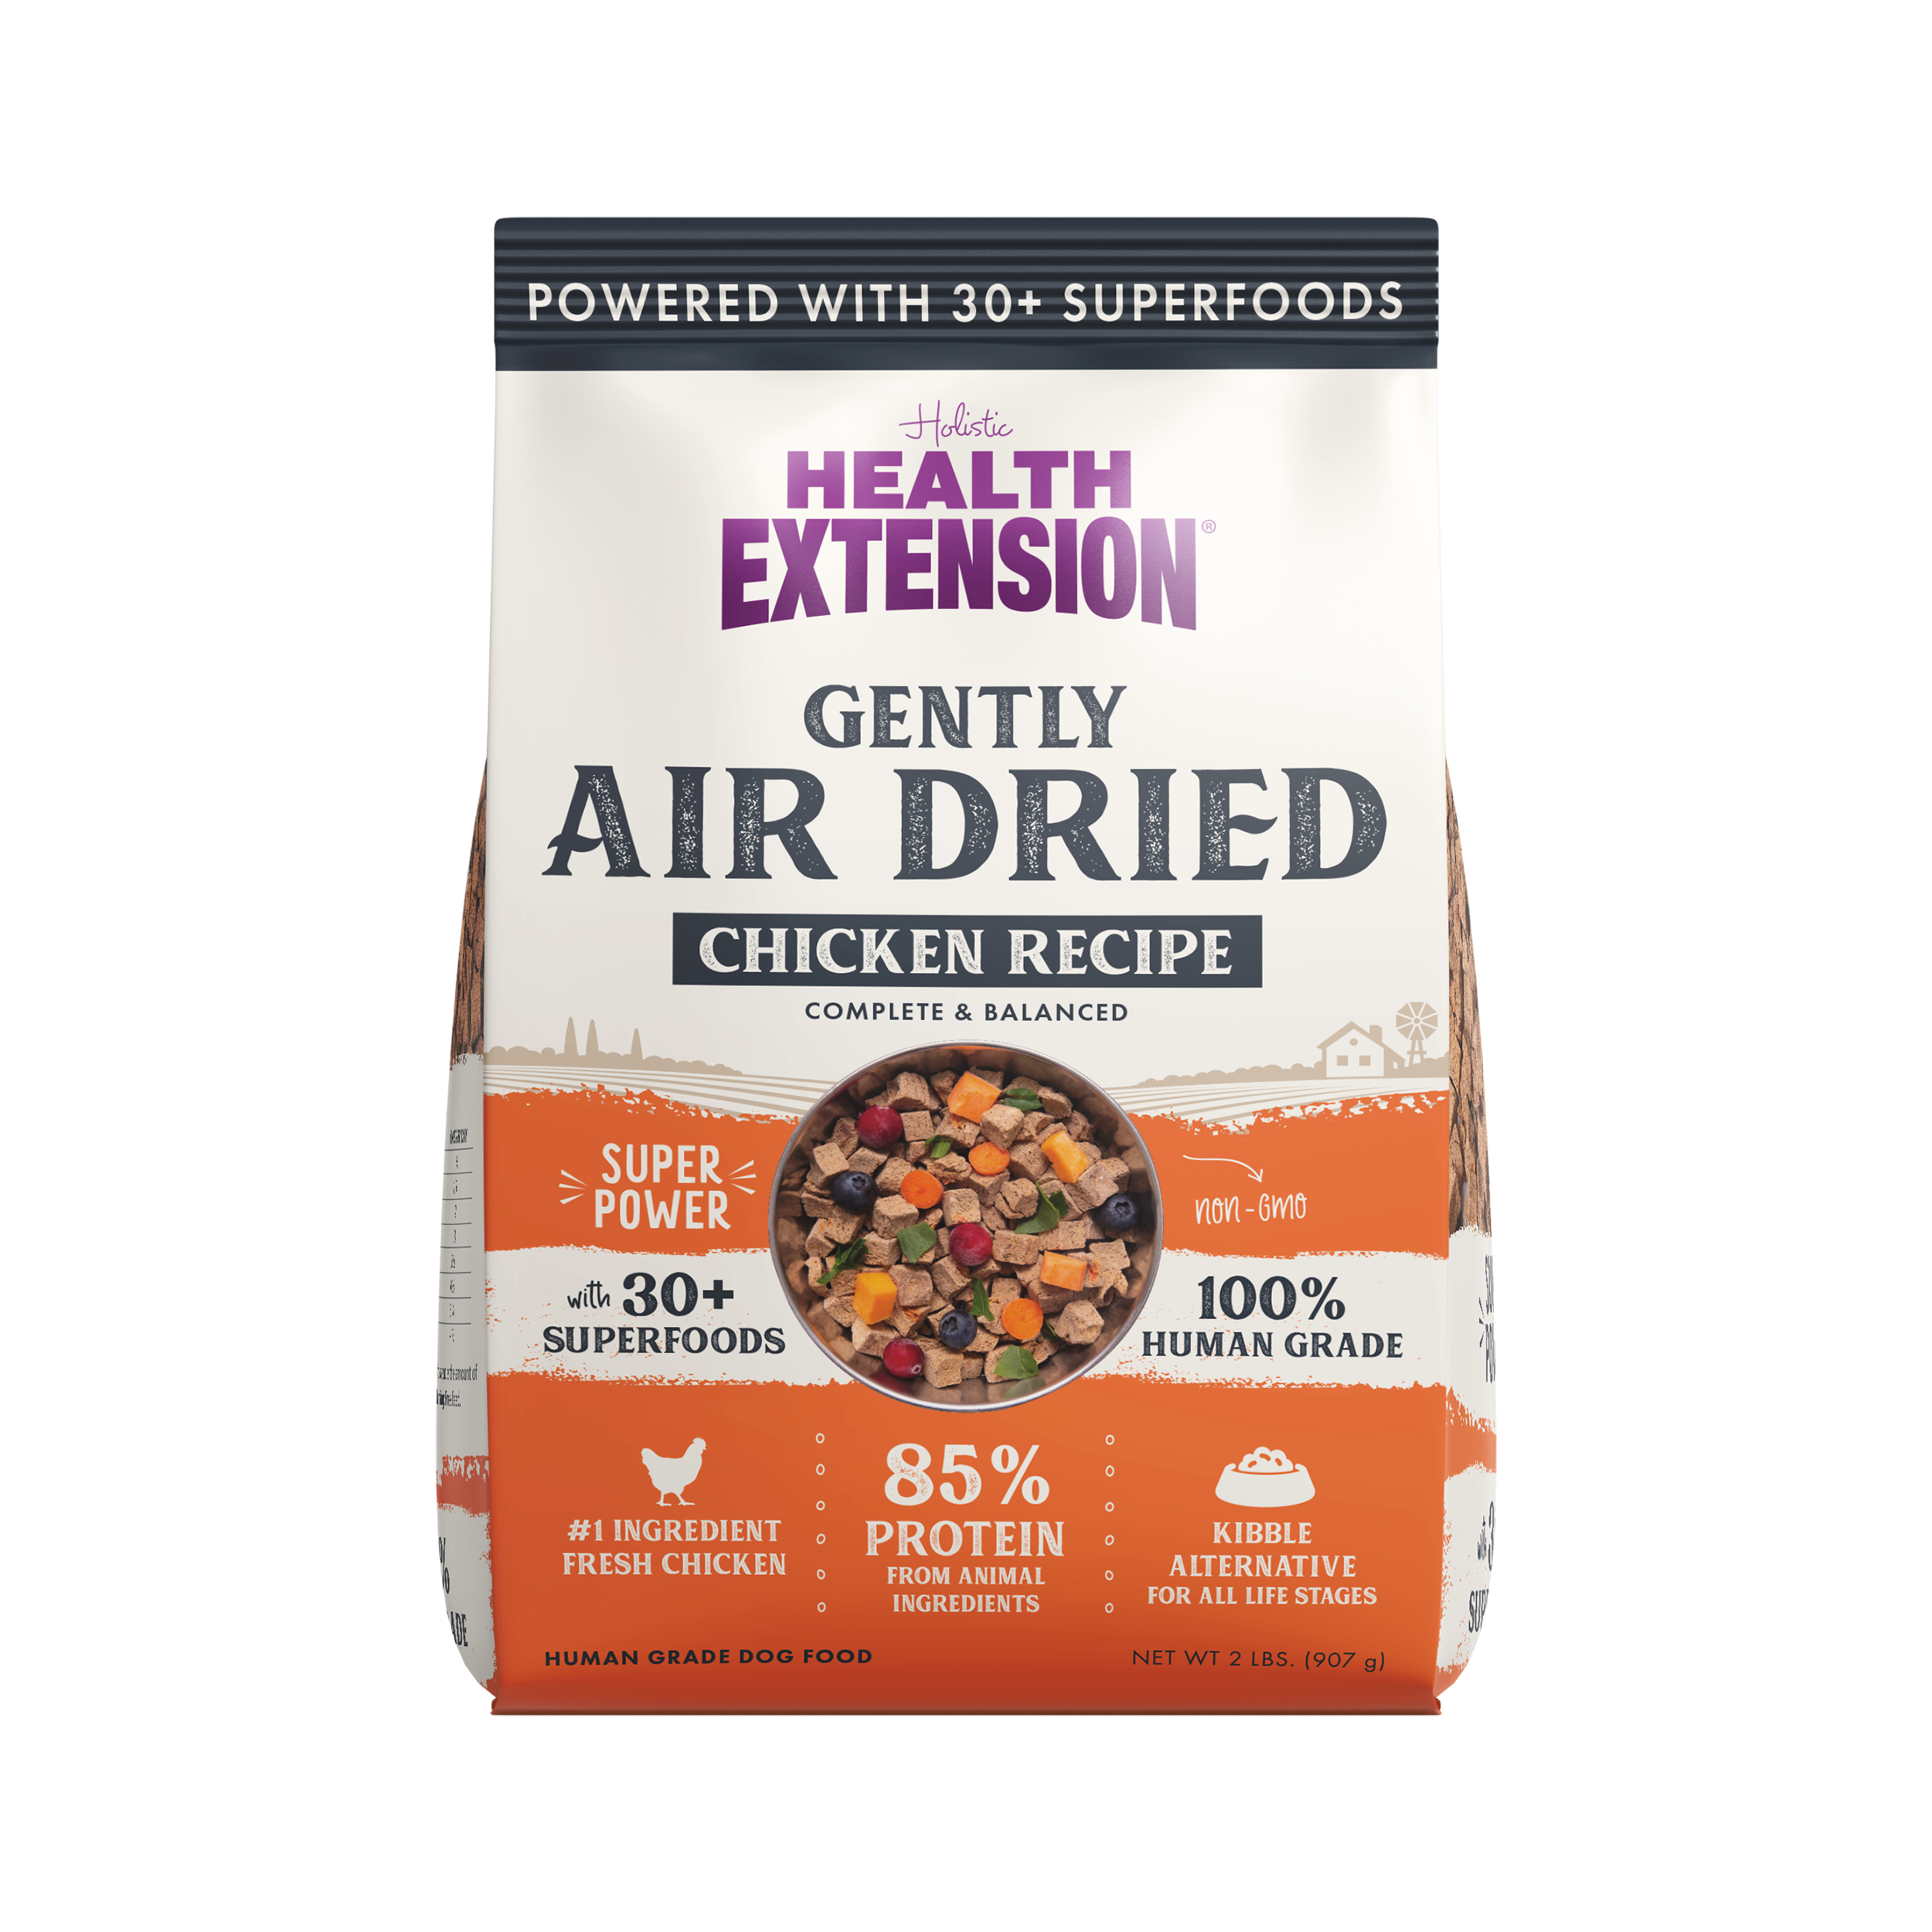 Packaging of Health Extension Gently Air Dried Chicken Recipe dog food, emphasizing key features such as being powered with over 30+ superfoods, containing 85% protein from animal ingredients, and being a 100% human-grade kibble alternative for all life stages. The front view shows the product name, a window displaying the air-dried food, and badges highlighting the #1 ingredient as fresh chicken, non-GMO, and suitable for all life stages.